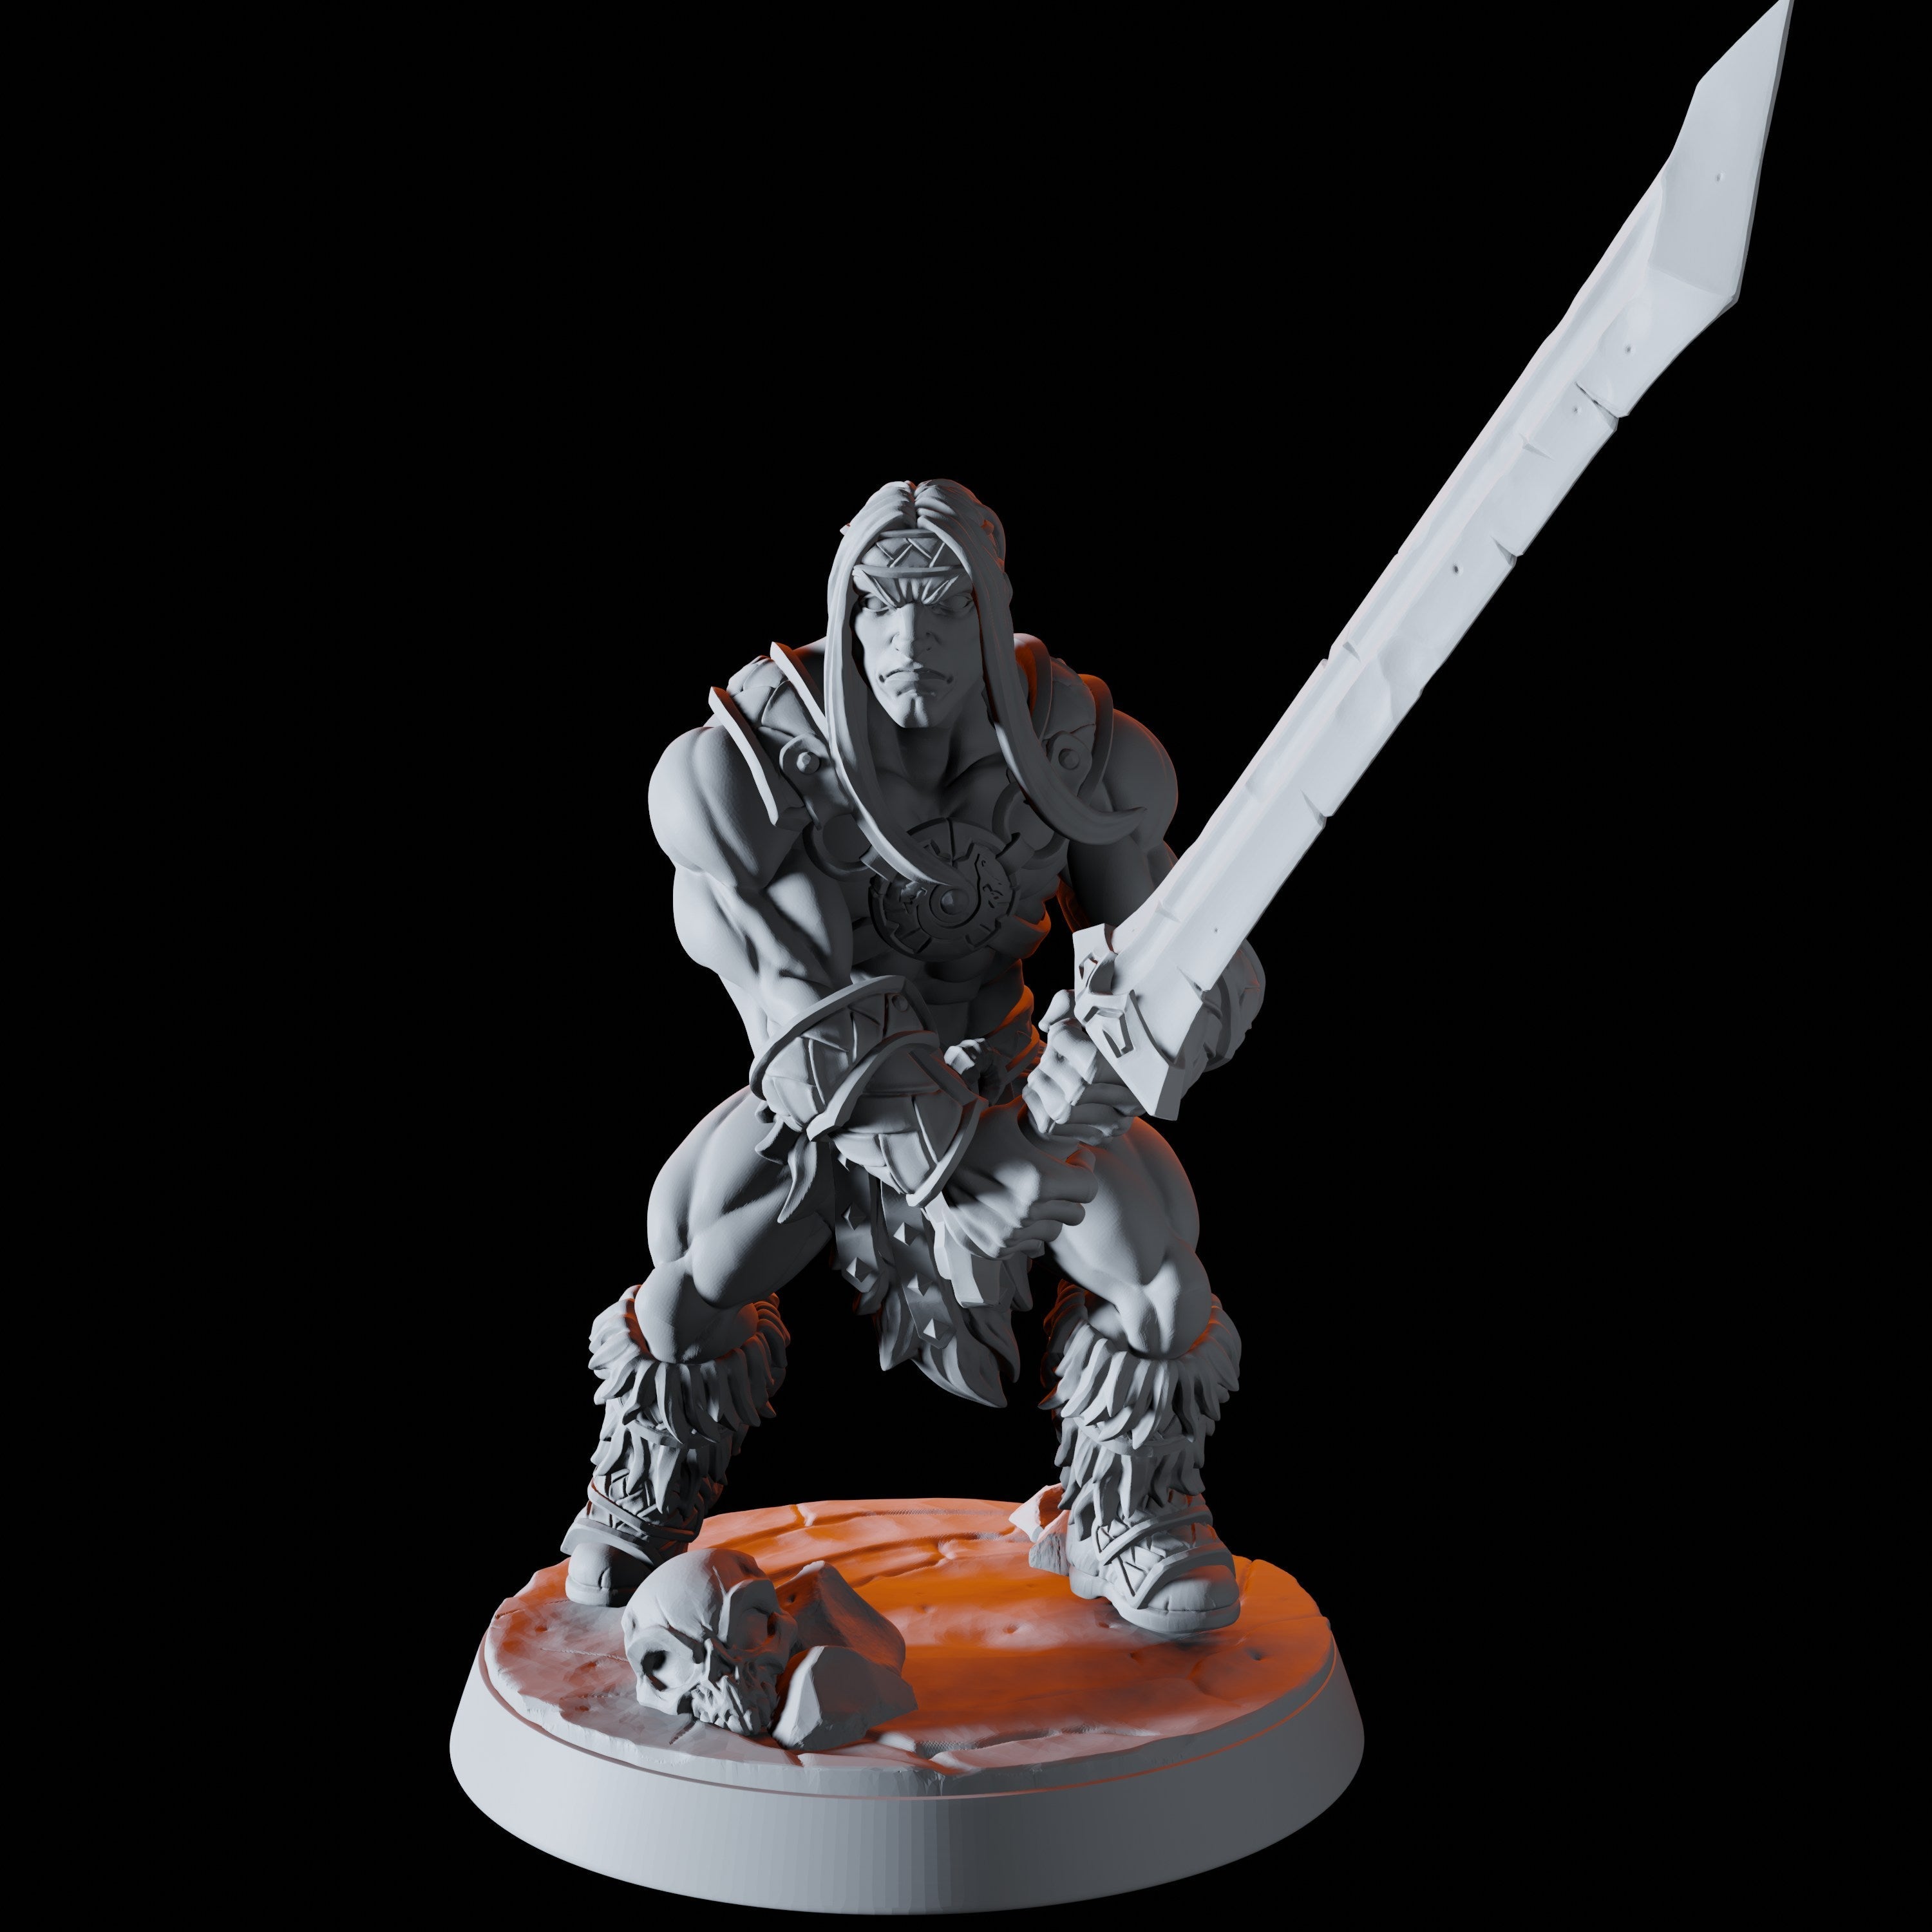 Barbarian Horde - Six Barbarbian Miniatures for Dungeons and Dragons - Myth Forged